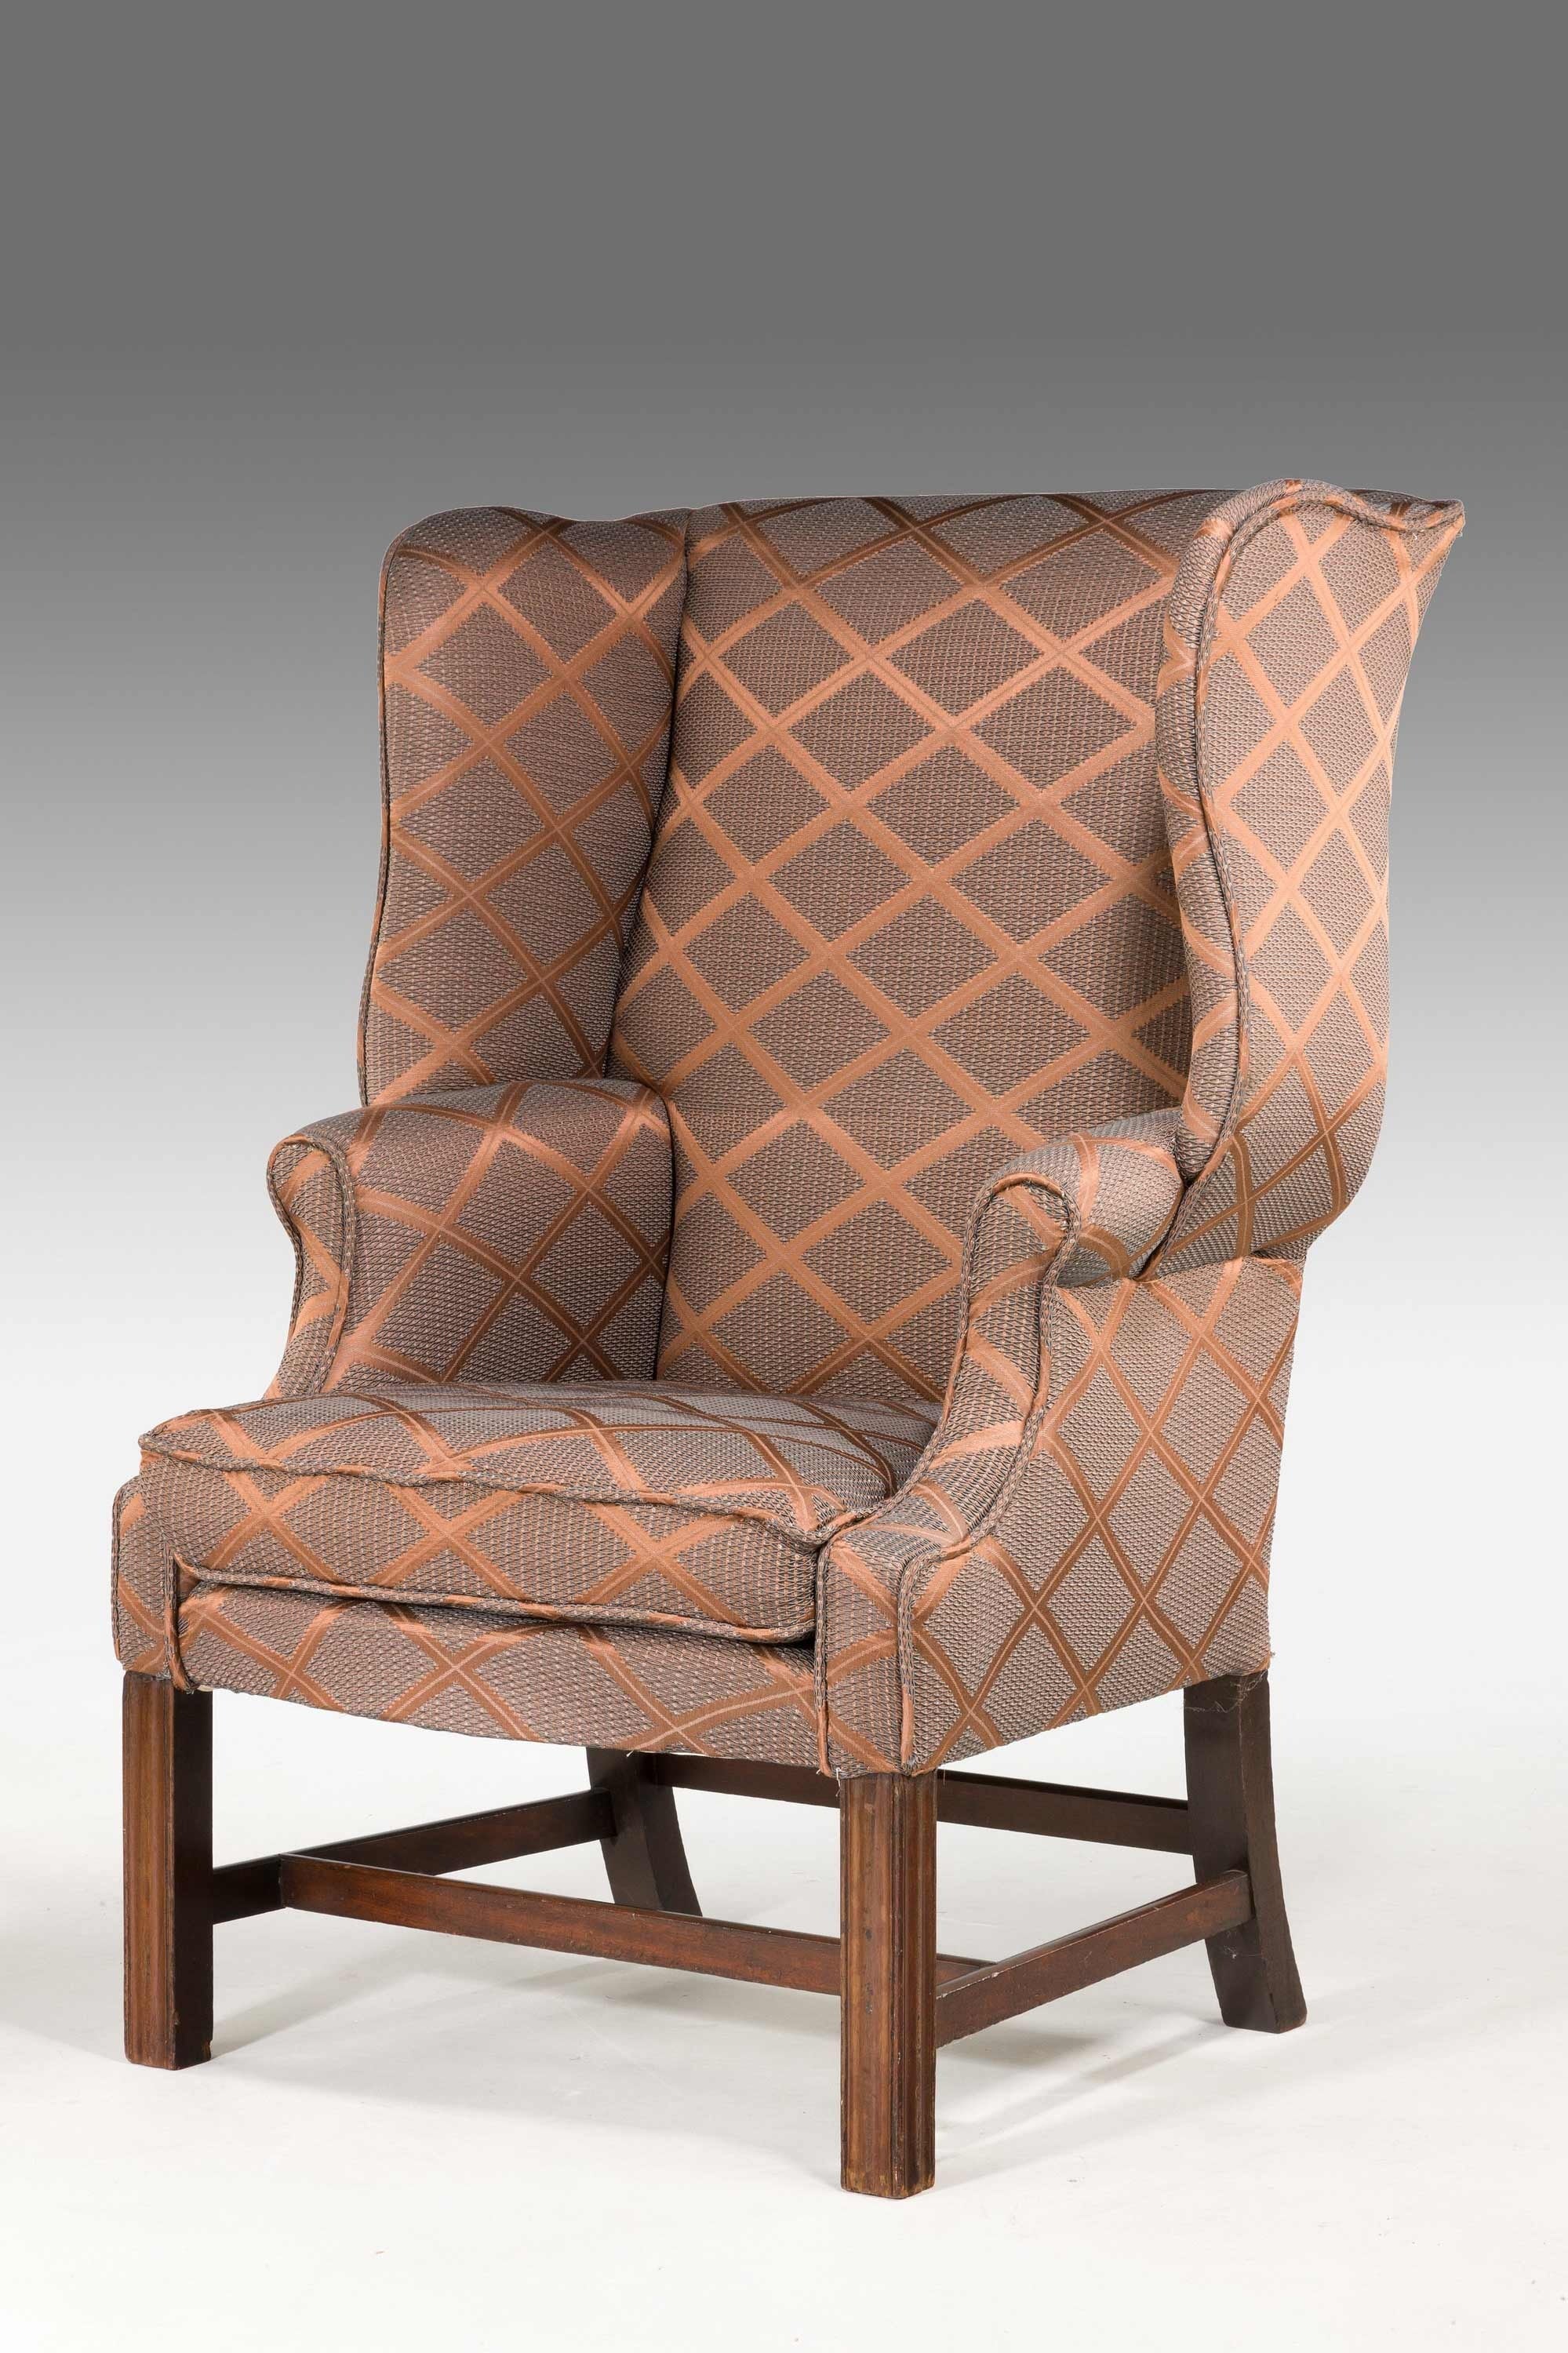 Chippendale Design Wing Chair